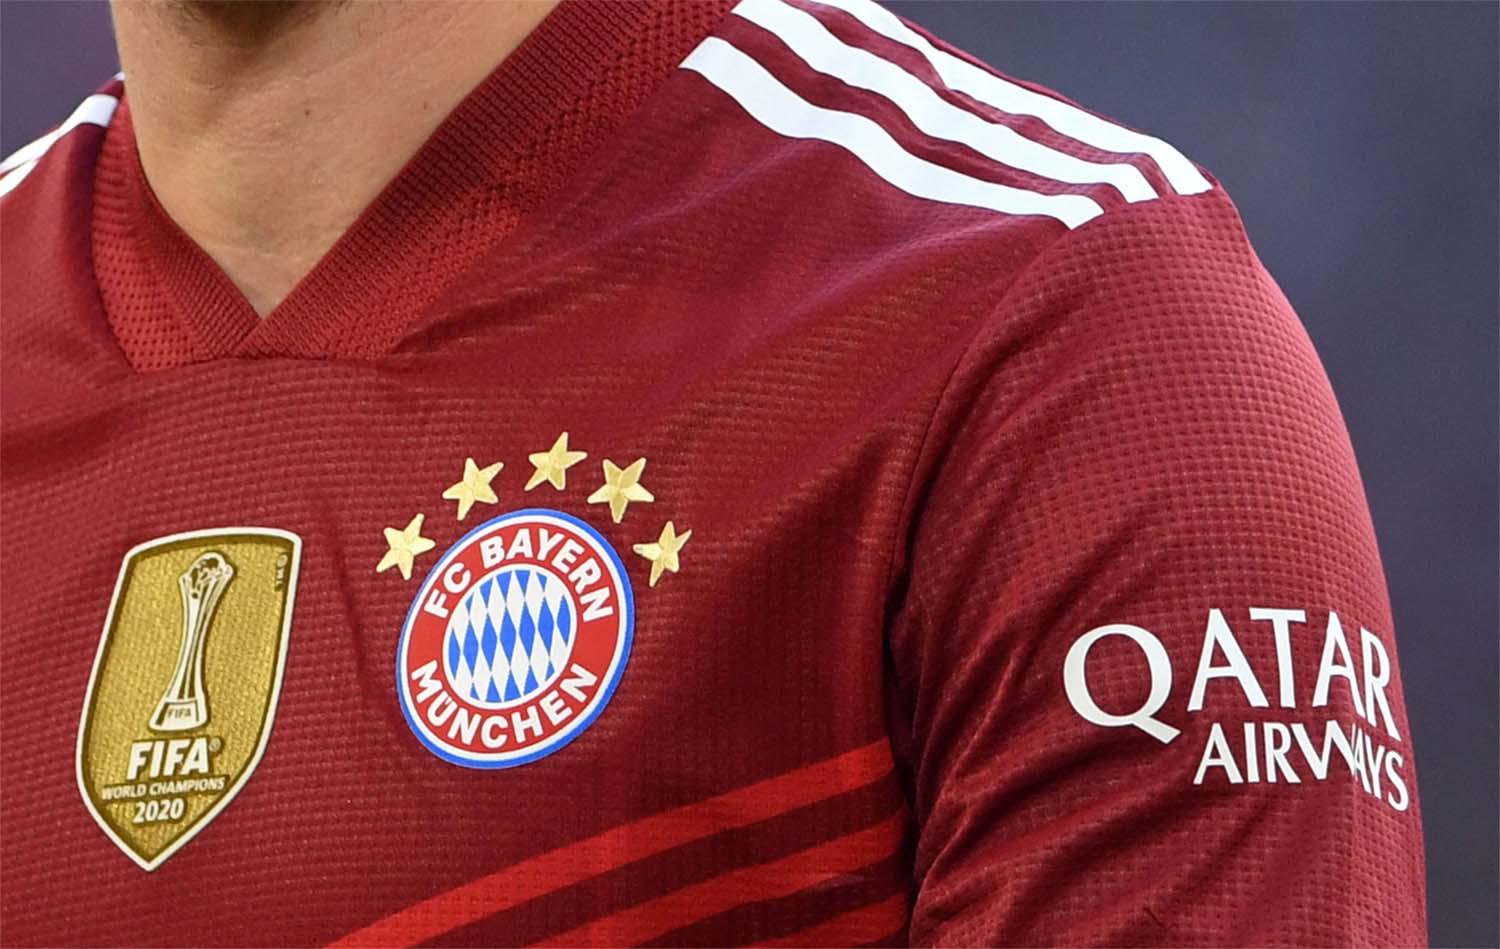 Bayern remain under fire from their own fans over sponsorship deal with Qatar Airways